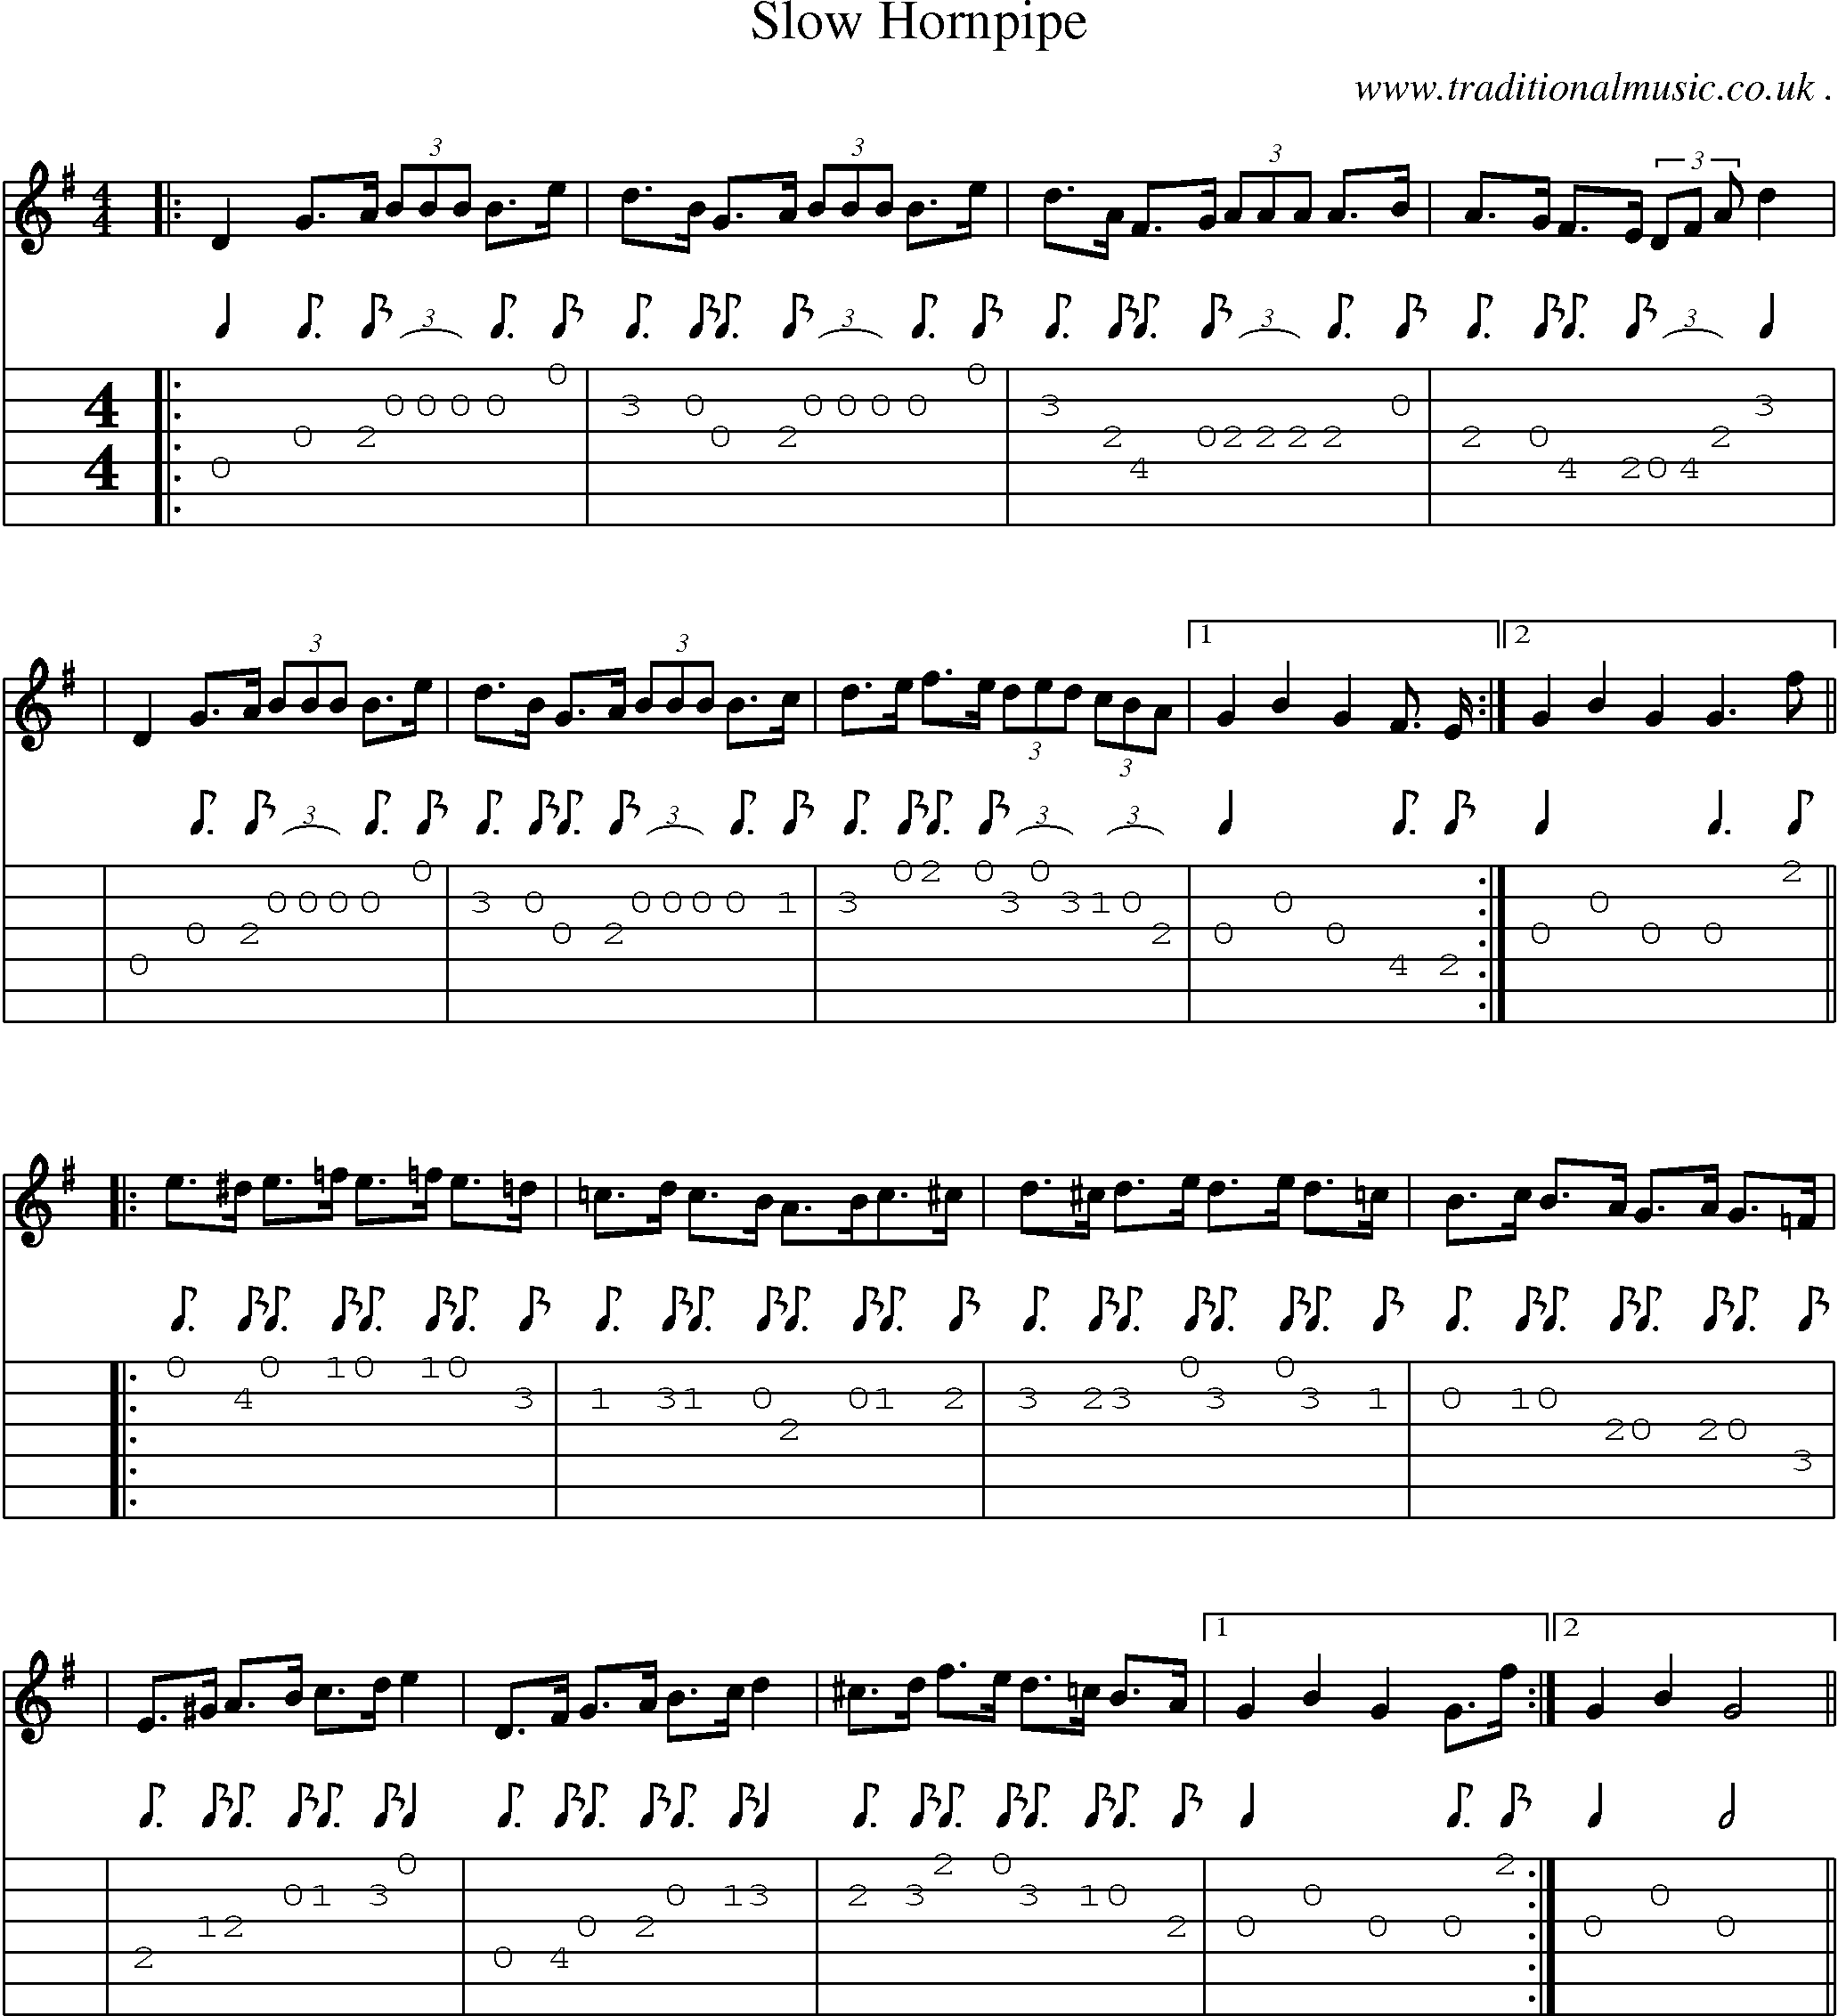 Sheet-Music and Guitar Tabs for Slow Hornpipe